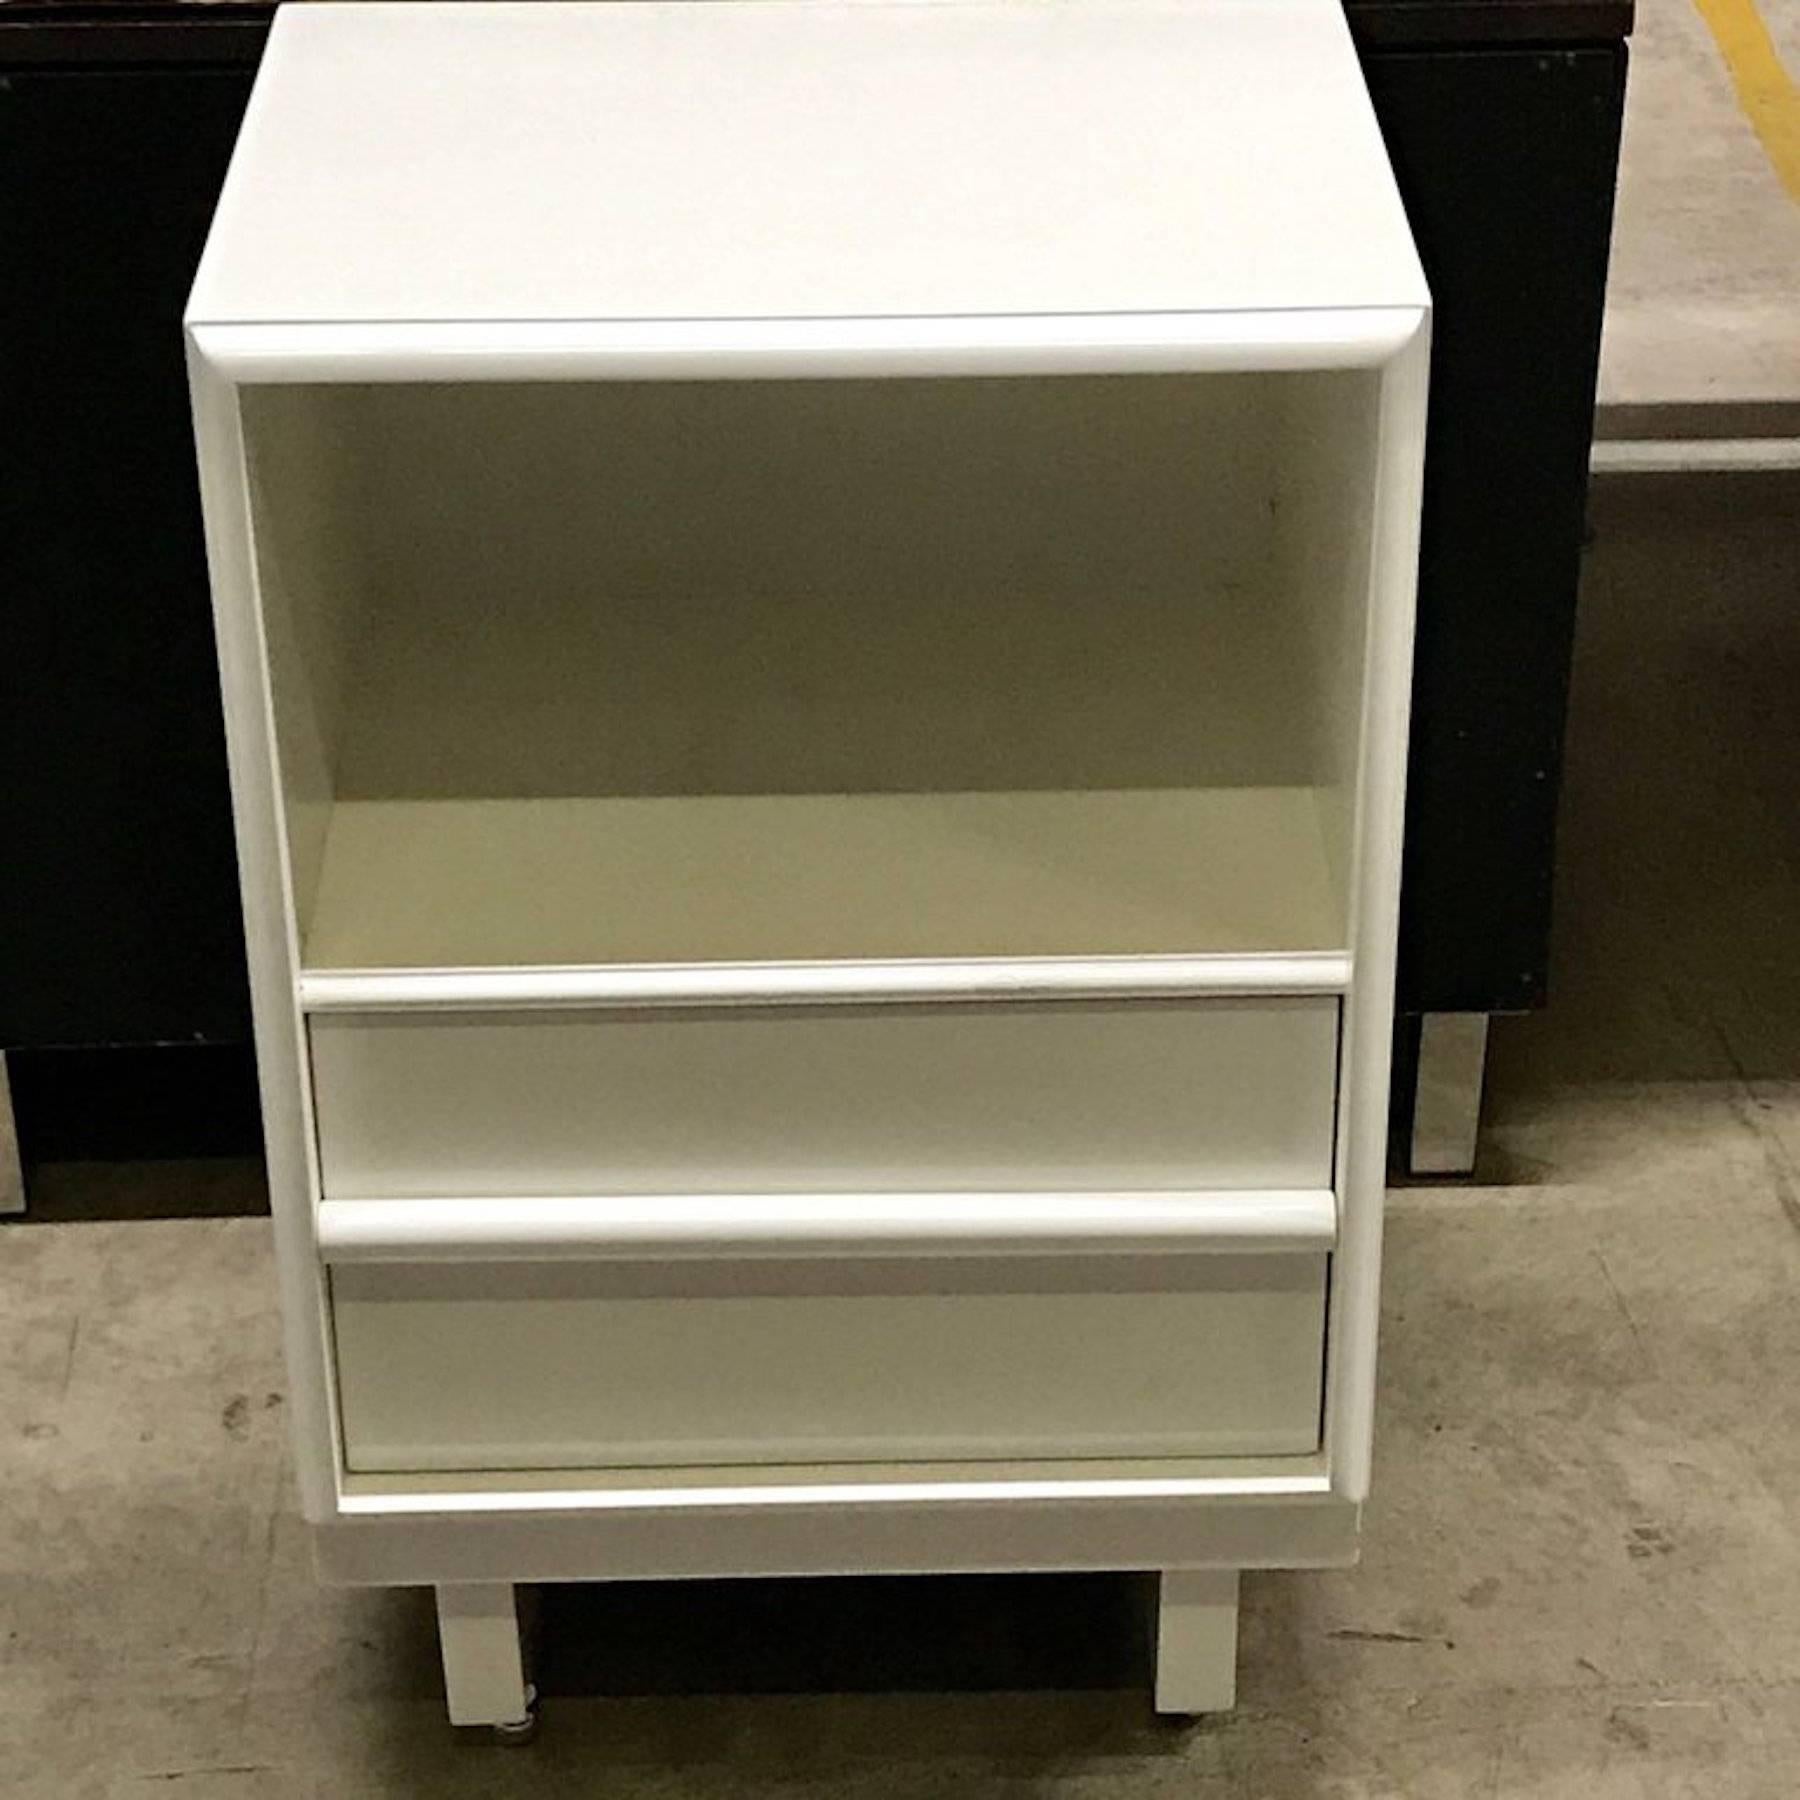 Pair of Robsjohn Gibbons white lacquered nightstands, beautiful lacquered finish. Fitted with one drawer measures 17